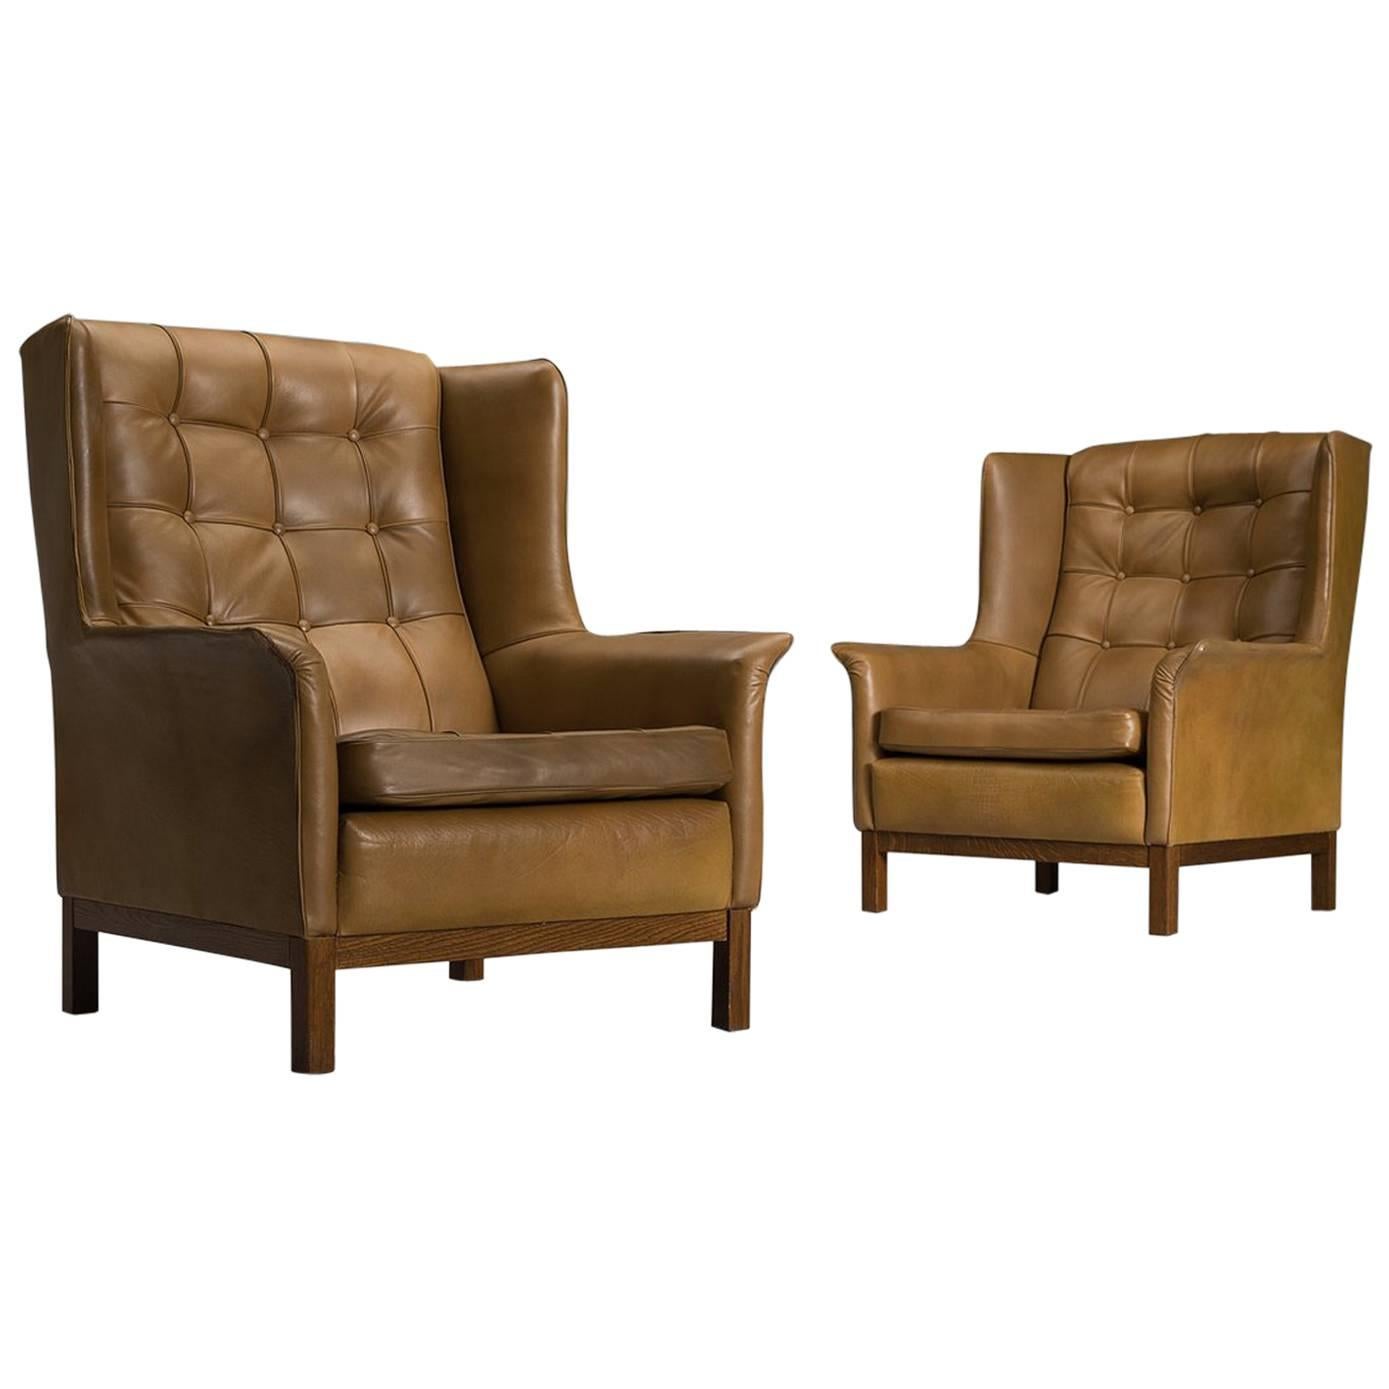 Arne Norell Matching Pair of High Back Chairs in Patinated Cognac Leather